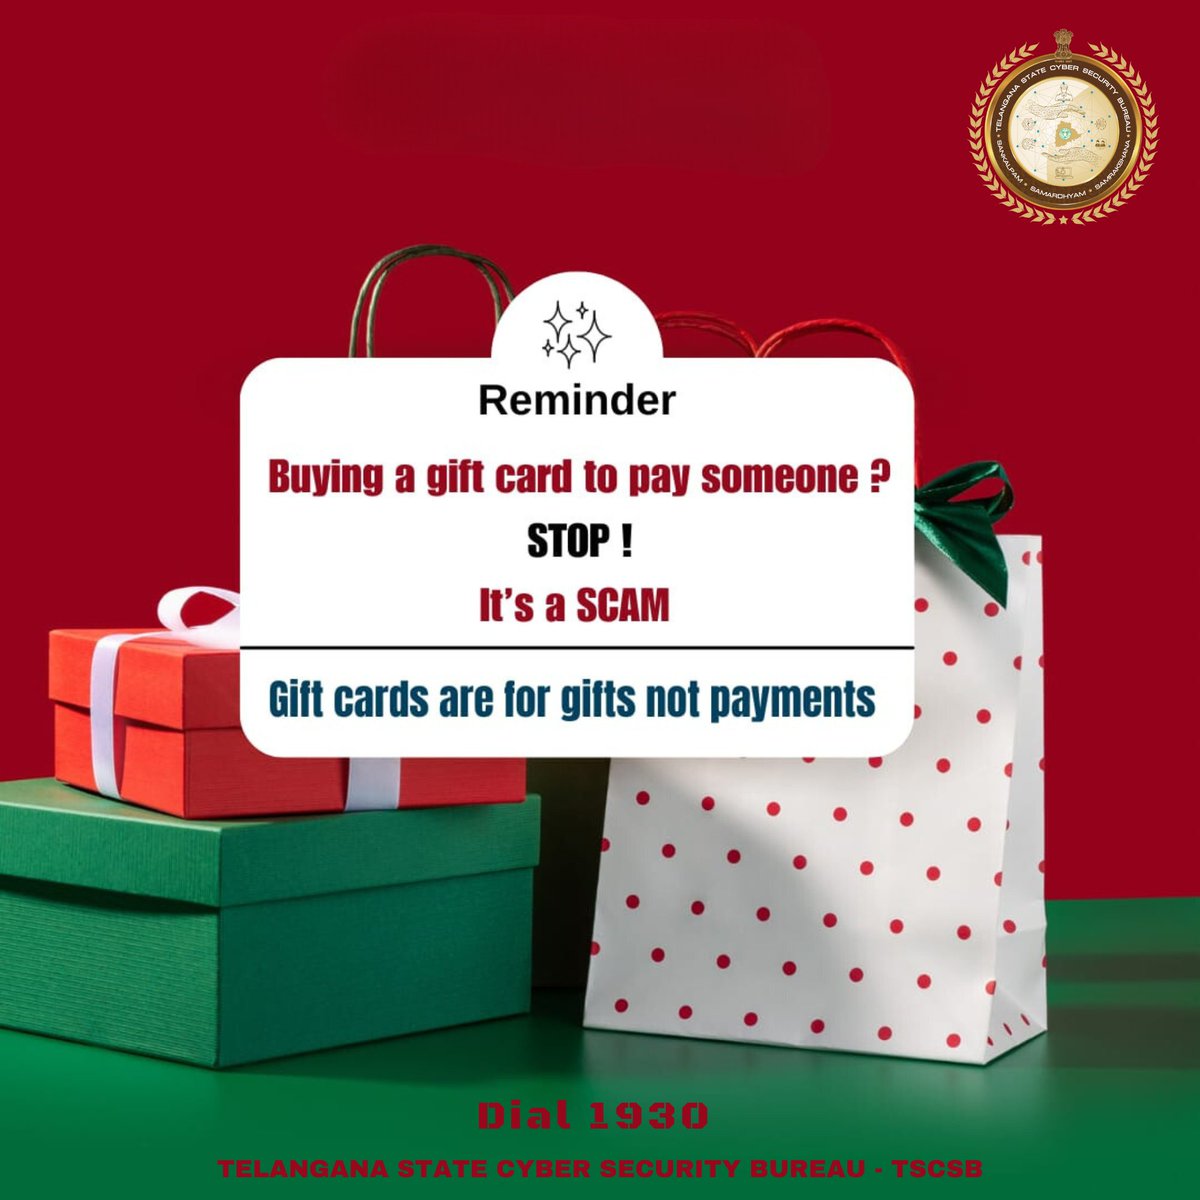 let's spread joy, not vulnerability. Stay cyber-safe during this new year holidays! Protect your online presence. Immediately #Dial1930 to report online financial fraud to increase the chances to save your money. Report any #cybercrime at cybercrime.gov.in #GiftCard #TSCSB